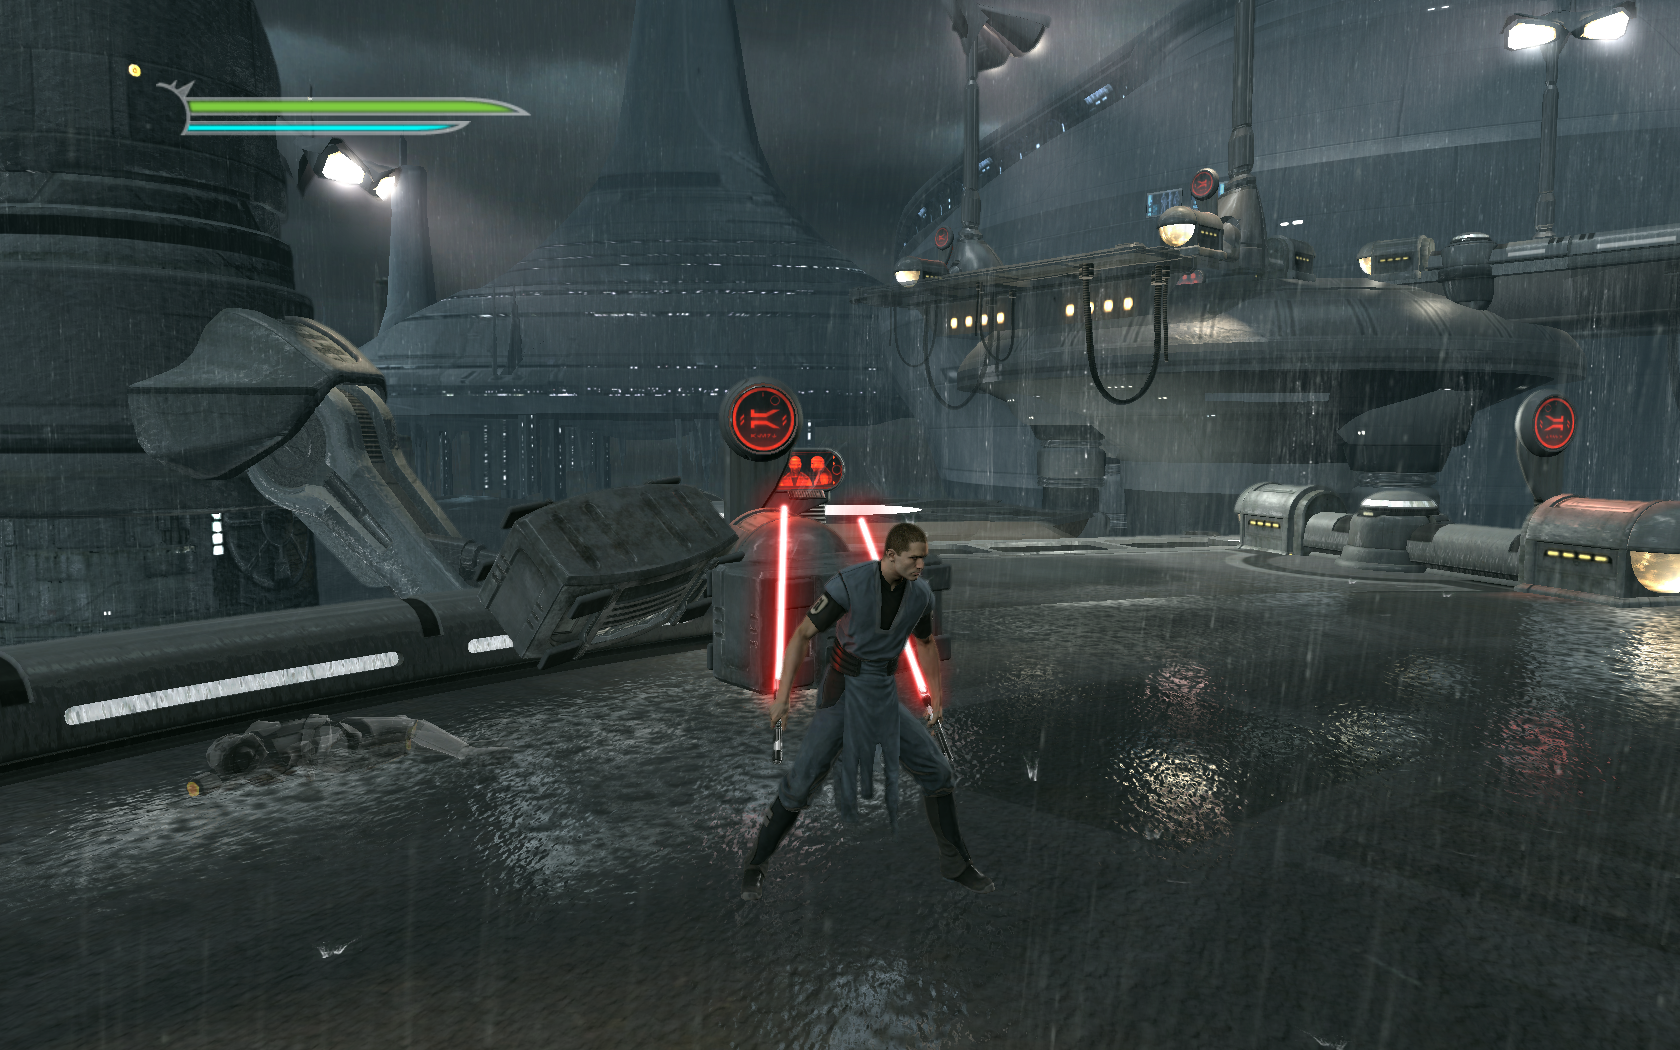 Star wars игры на русском. Star Wars unleashed 2. Стар ВАРС the Force unleashed 2. Игра Star Wars unleashed 3. Star Wars Starkiller игра.